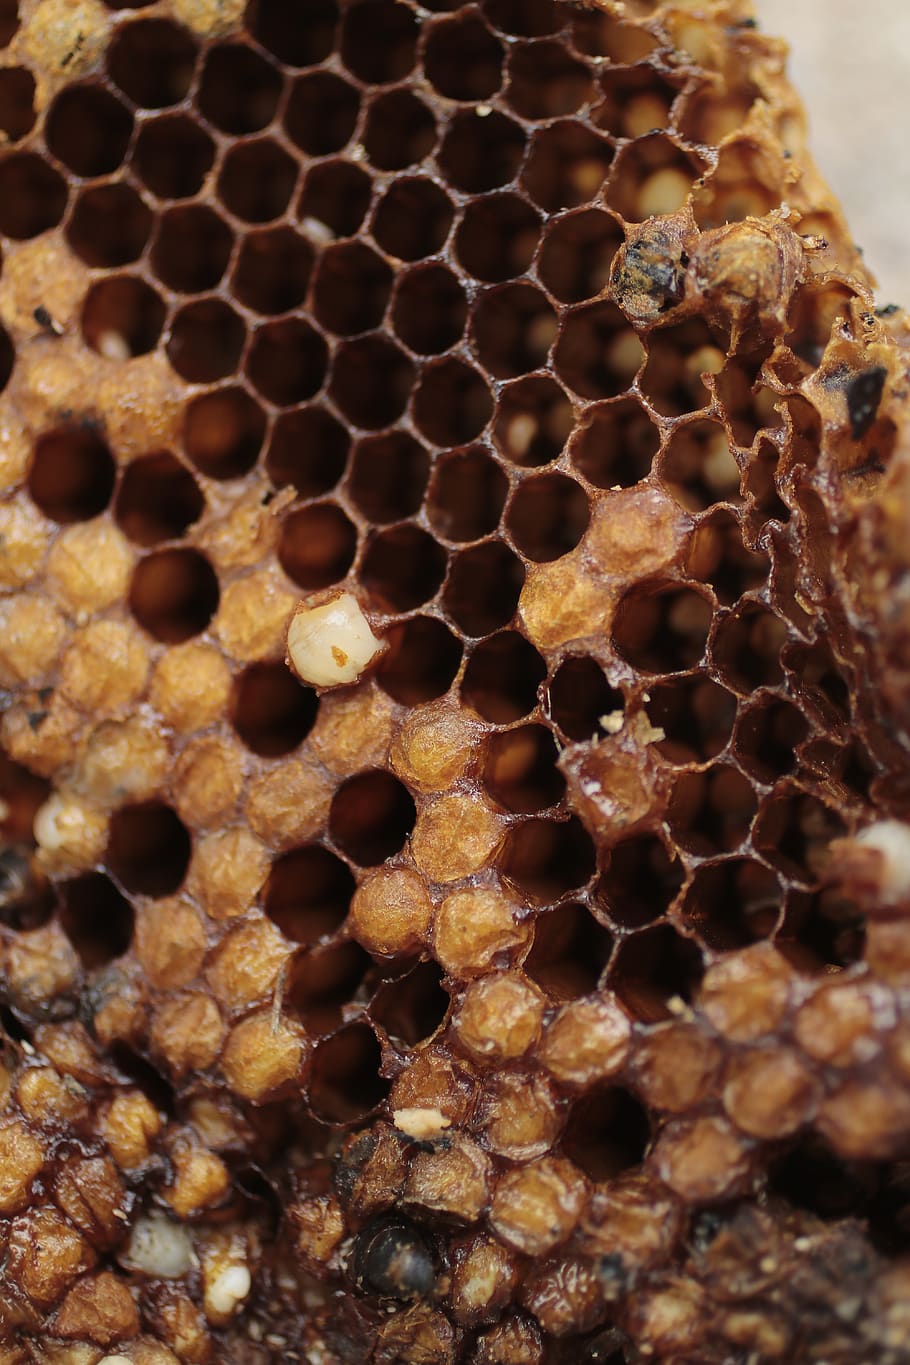 bee, input, diaper, ivy, honeycomb, close-up, beehive, apiculture